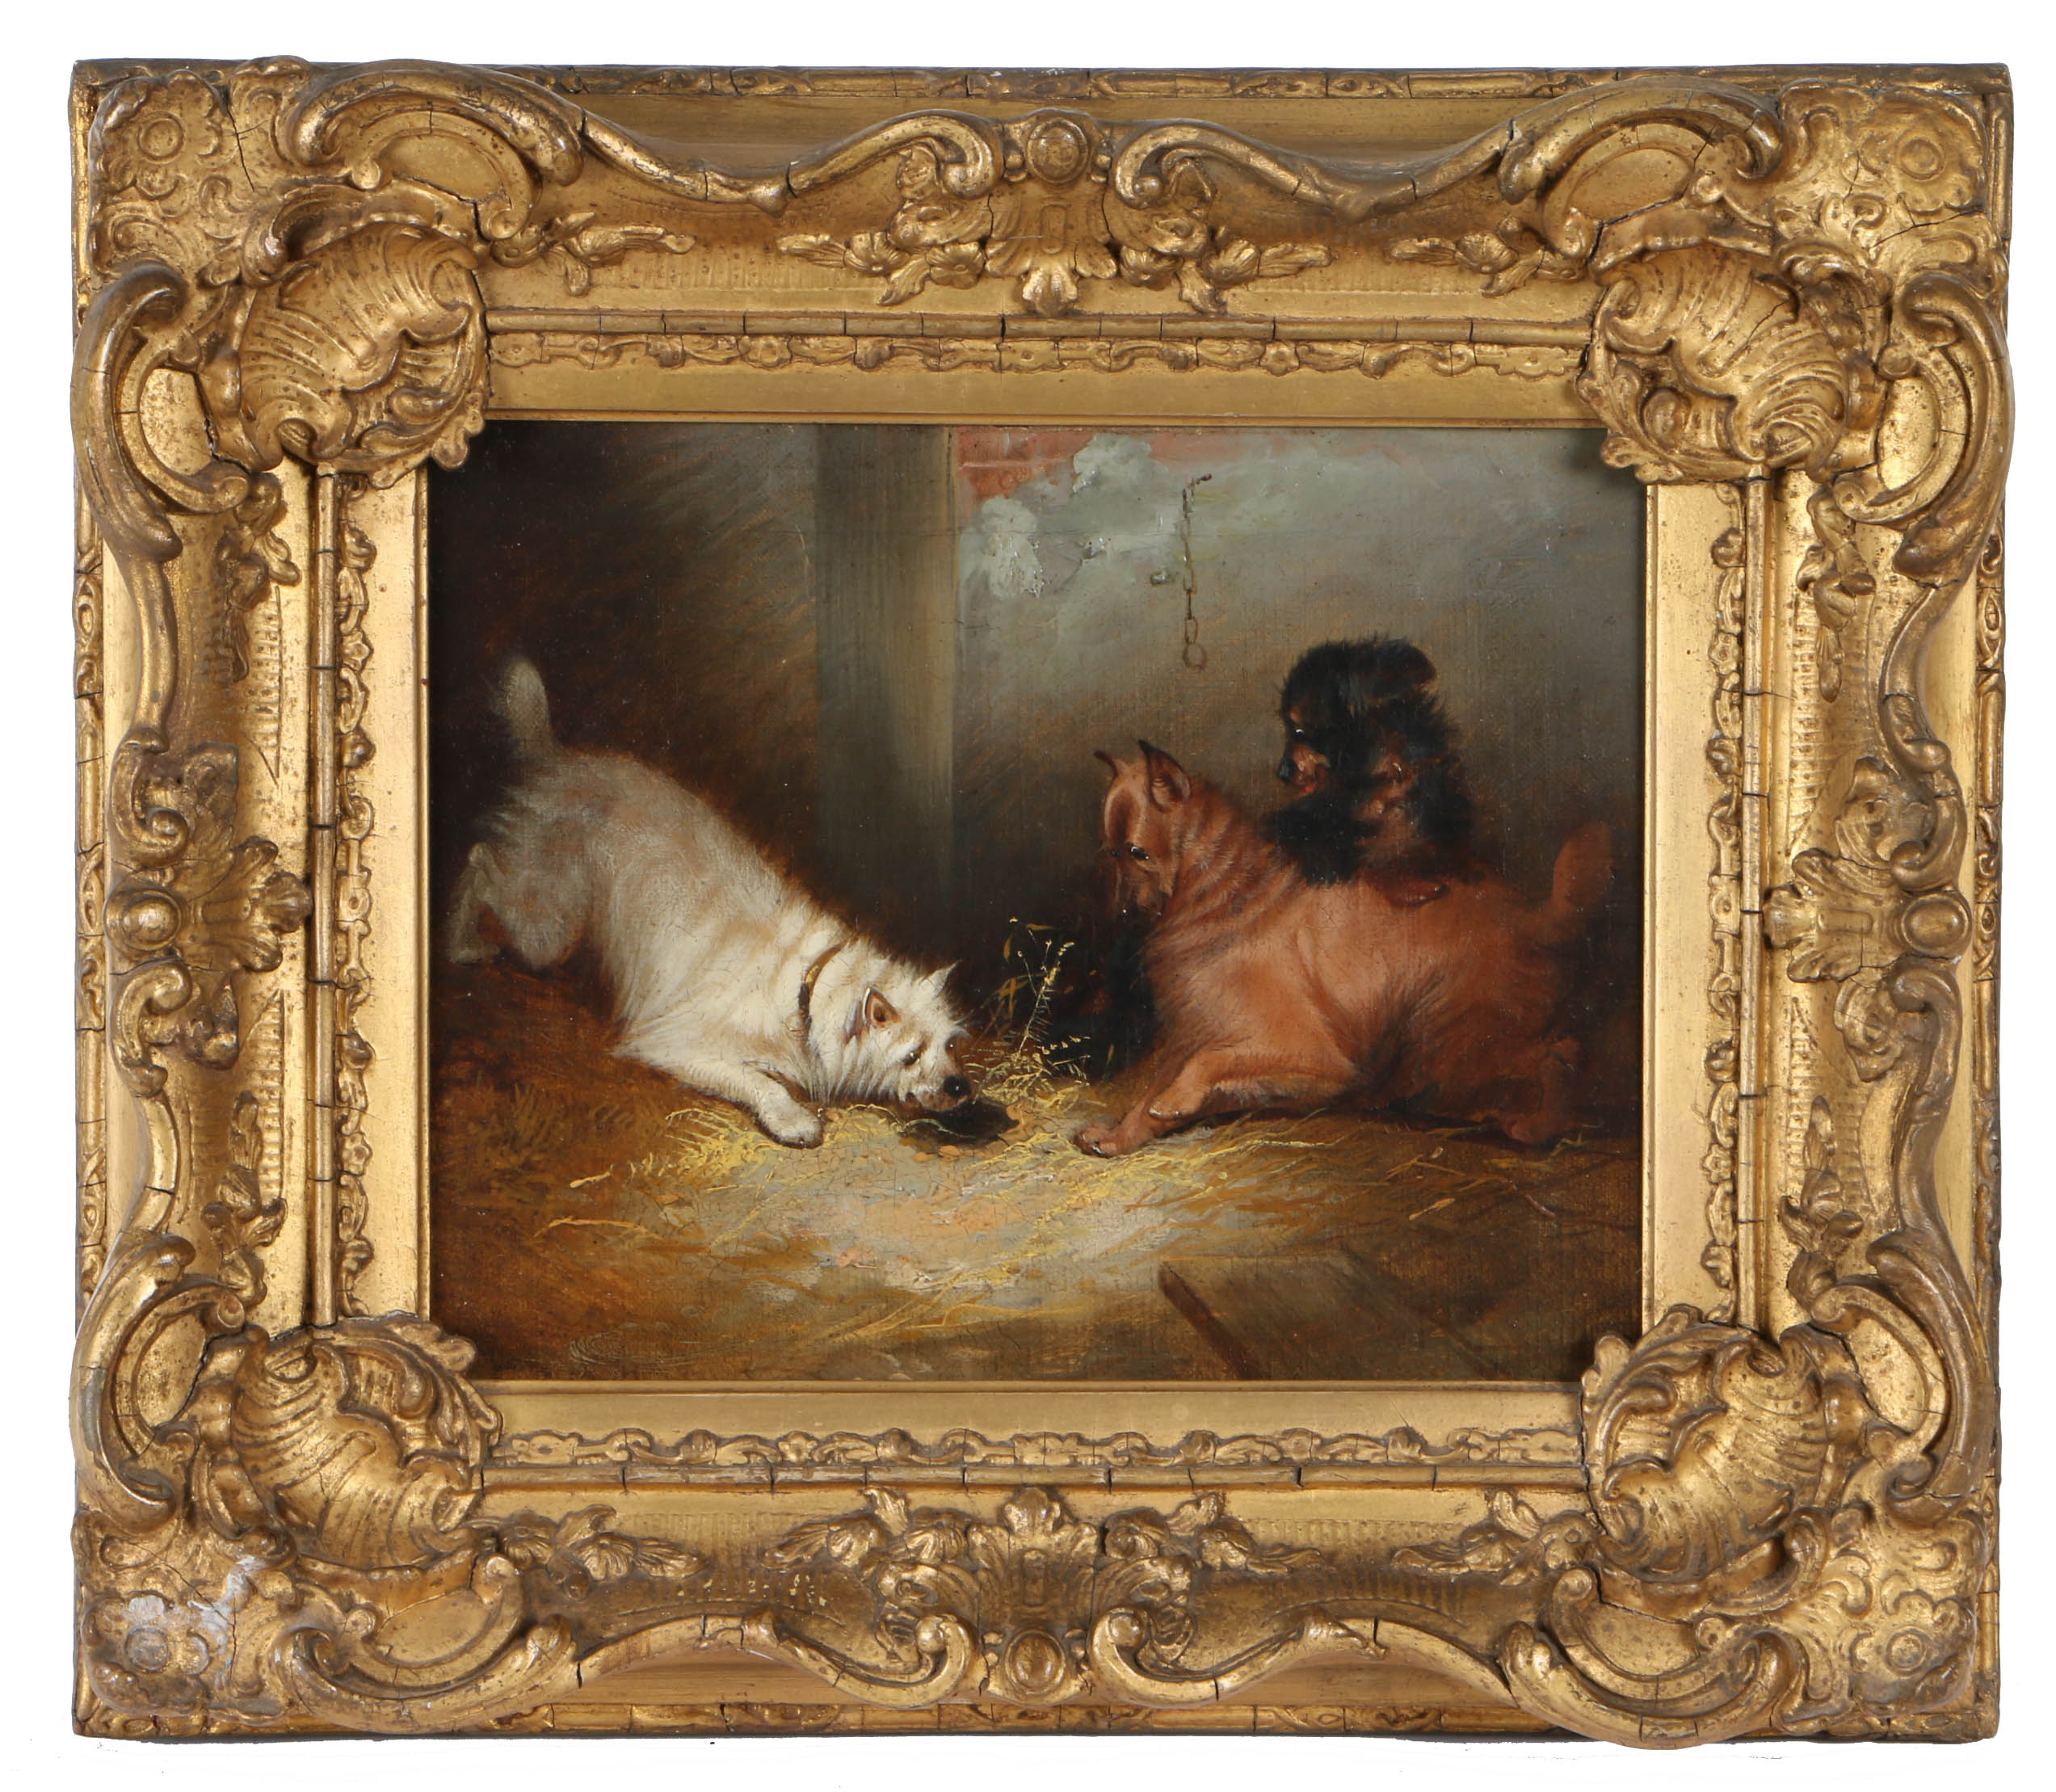 Attributed to George Armfield (British, 1808-1893) Spaniels and Terriers pair of oils on canvas 19 x - Image 3 of 3